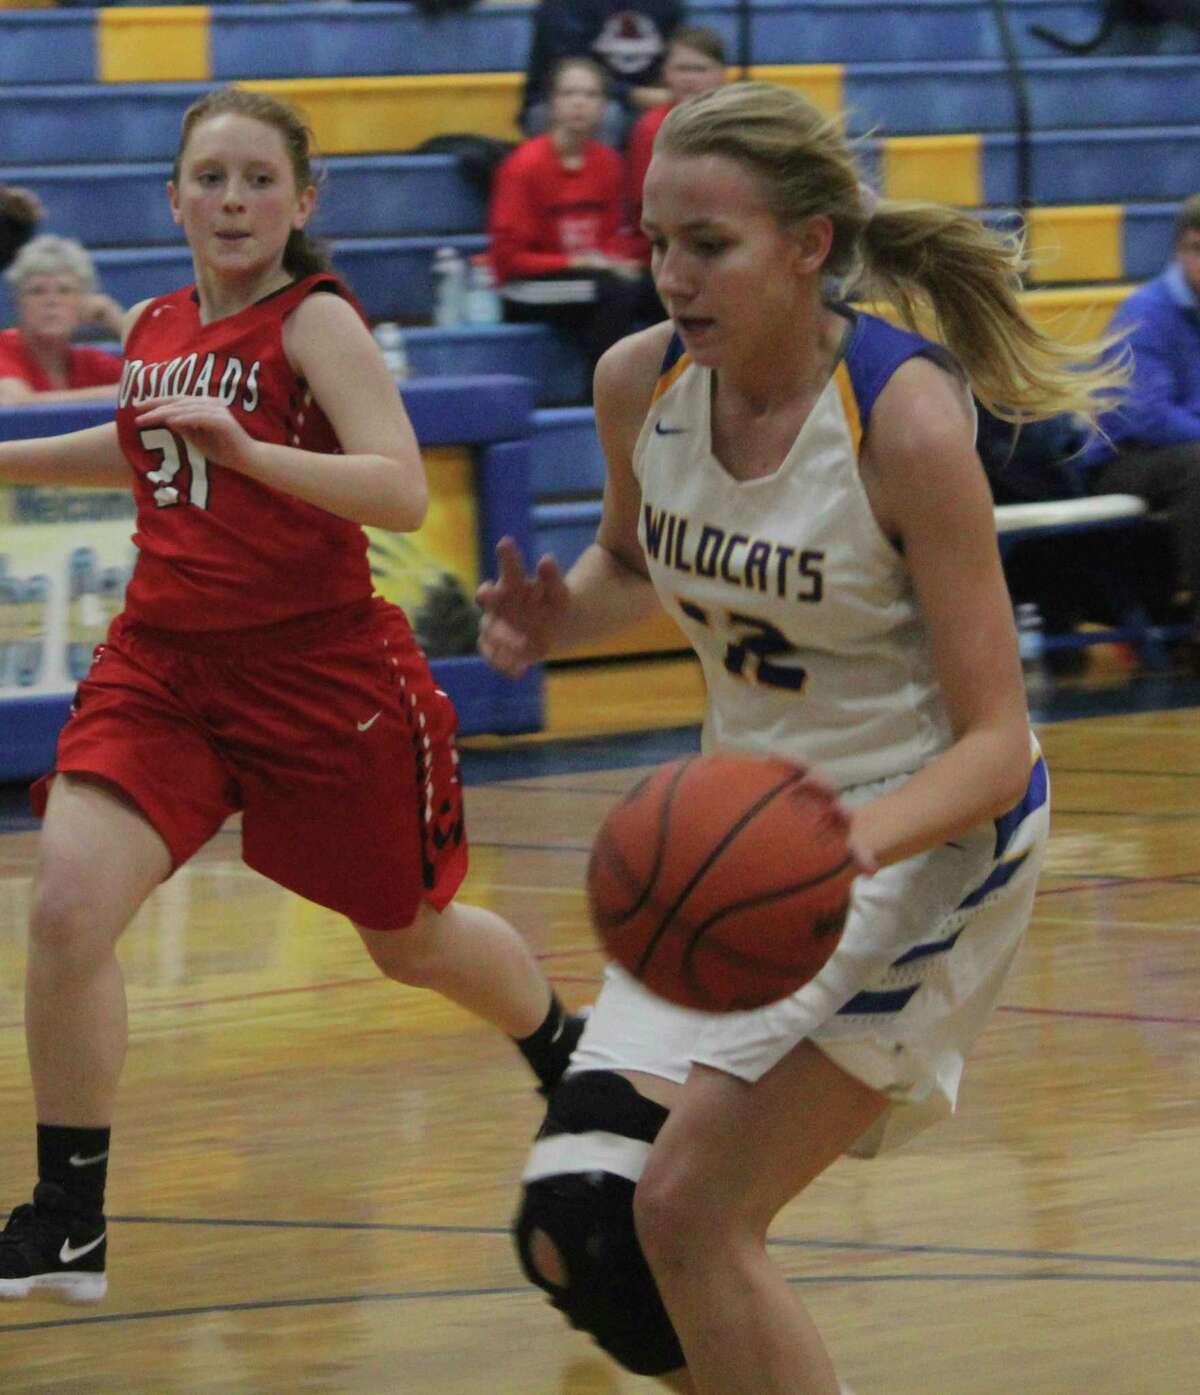 Kara Henry is expected to be among the top players for Evart basketball this season. (Pioneer photo file)